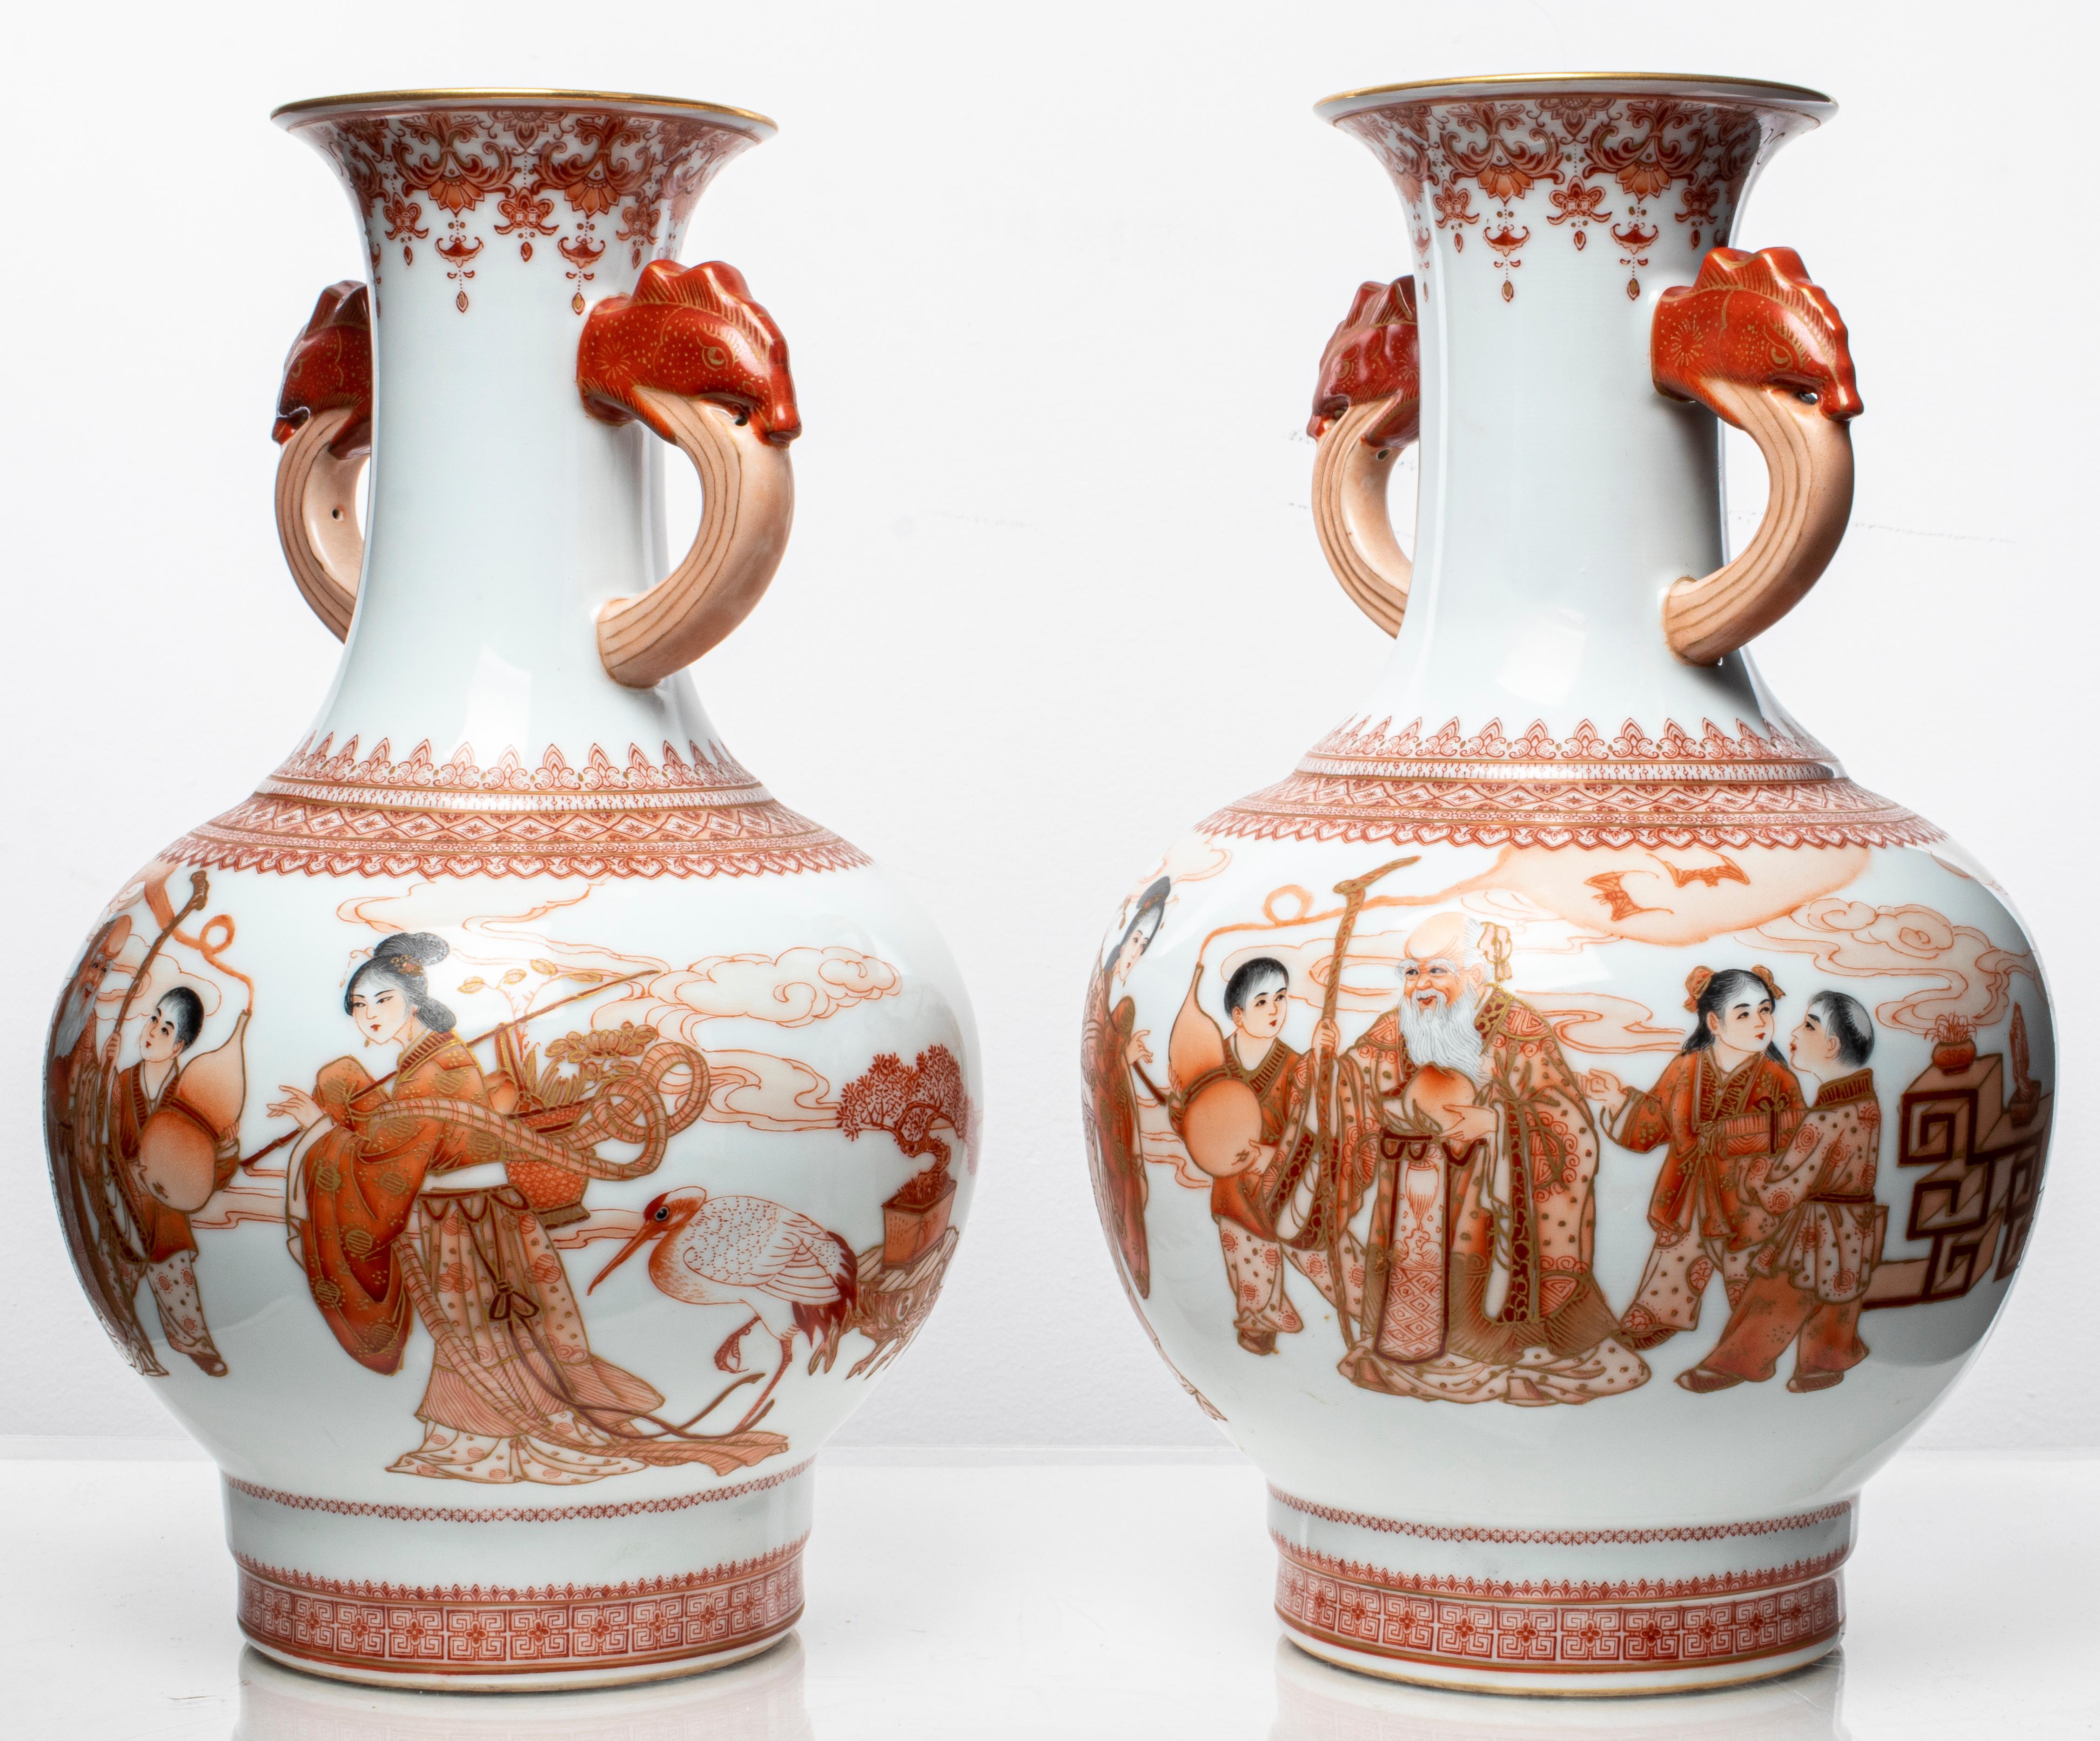 Pair of Chinese porcelain vases with double dragon handles and figural motif decoration, depicting scenes with elder and youth, signed underside. 13